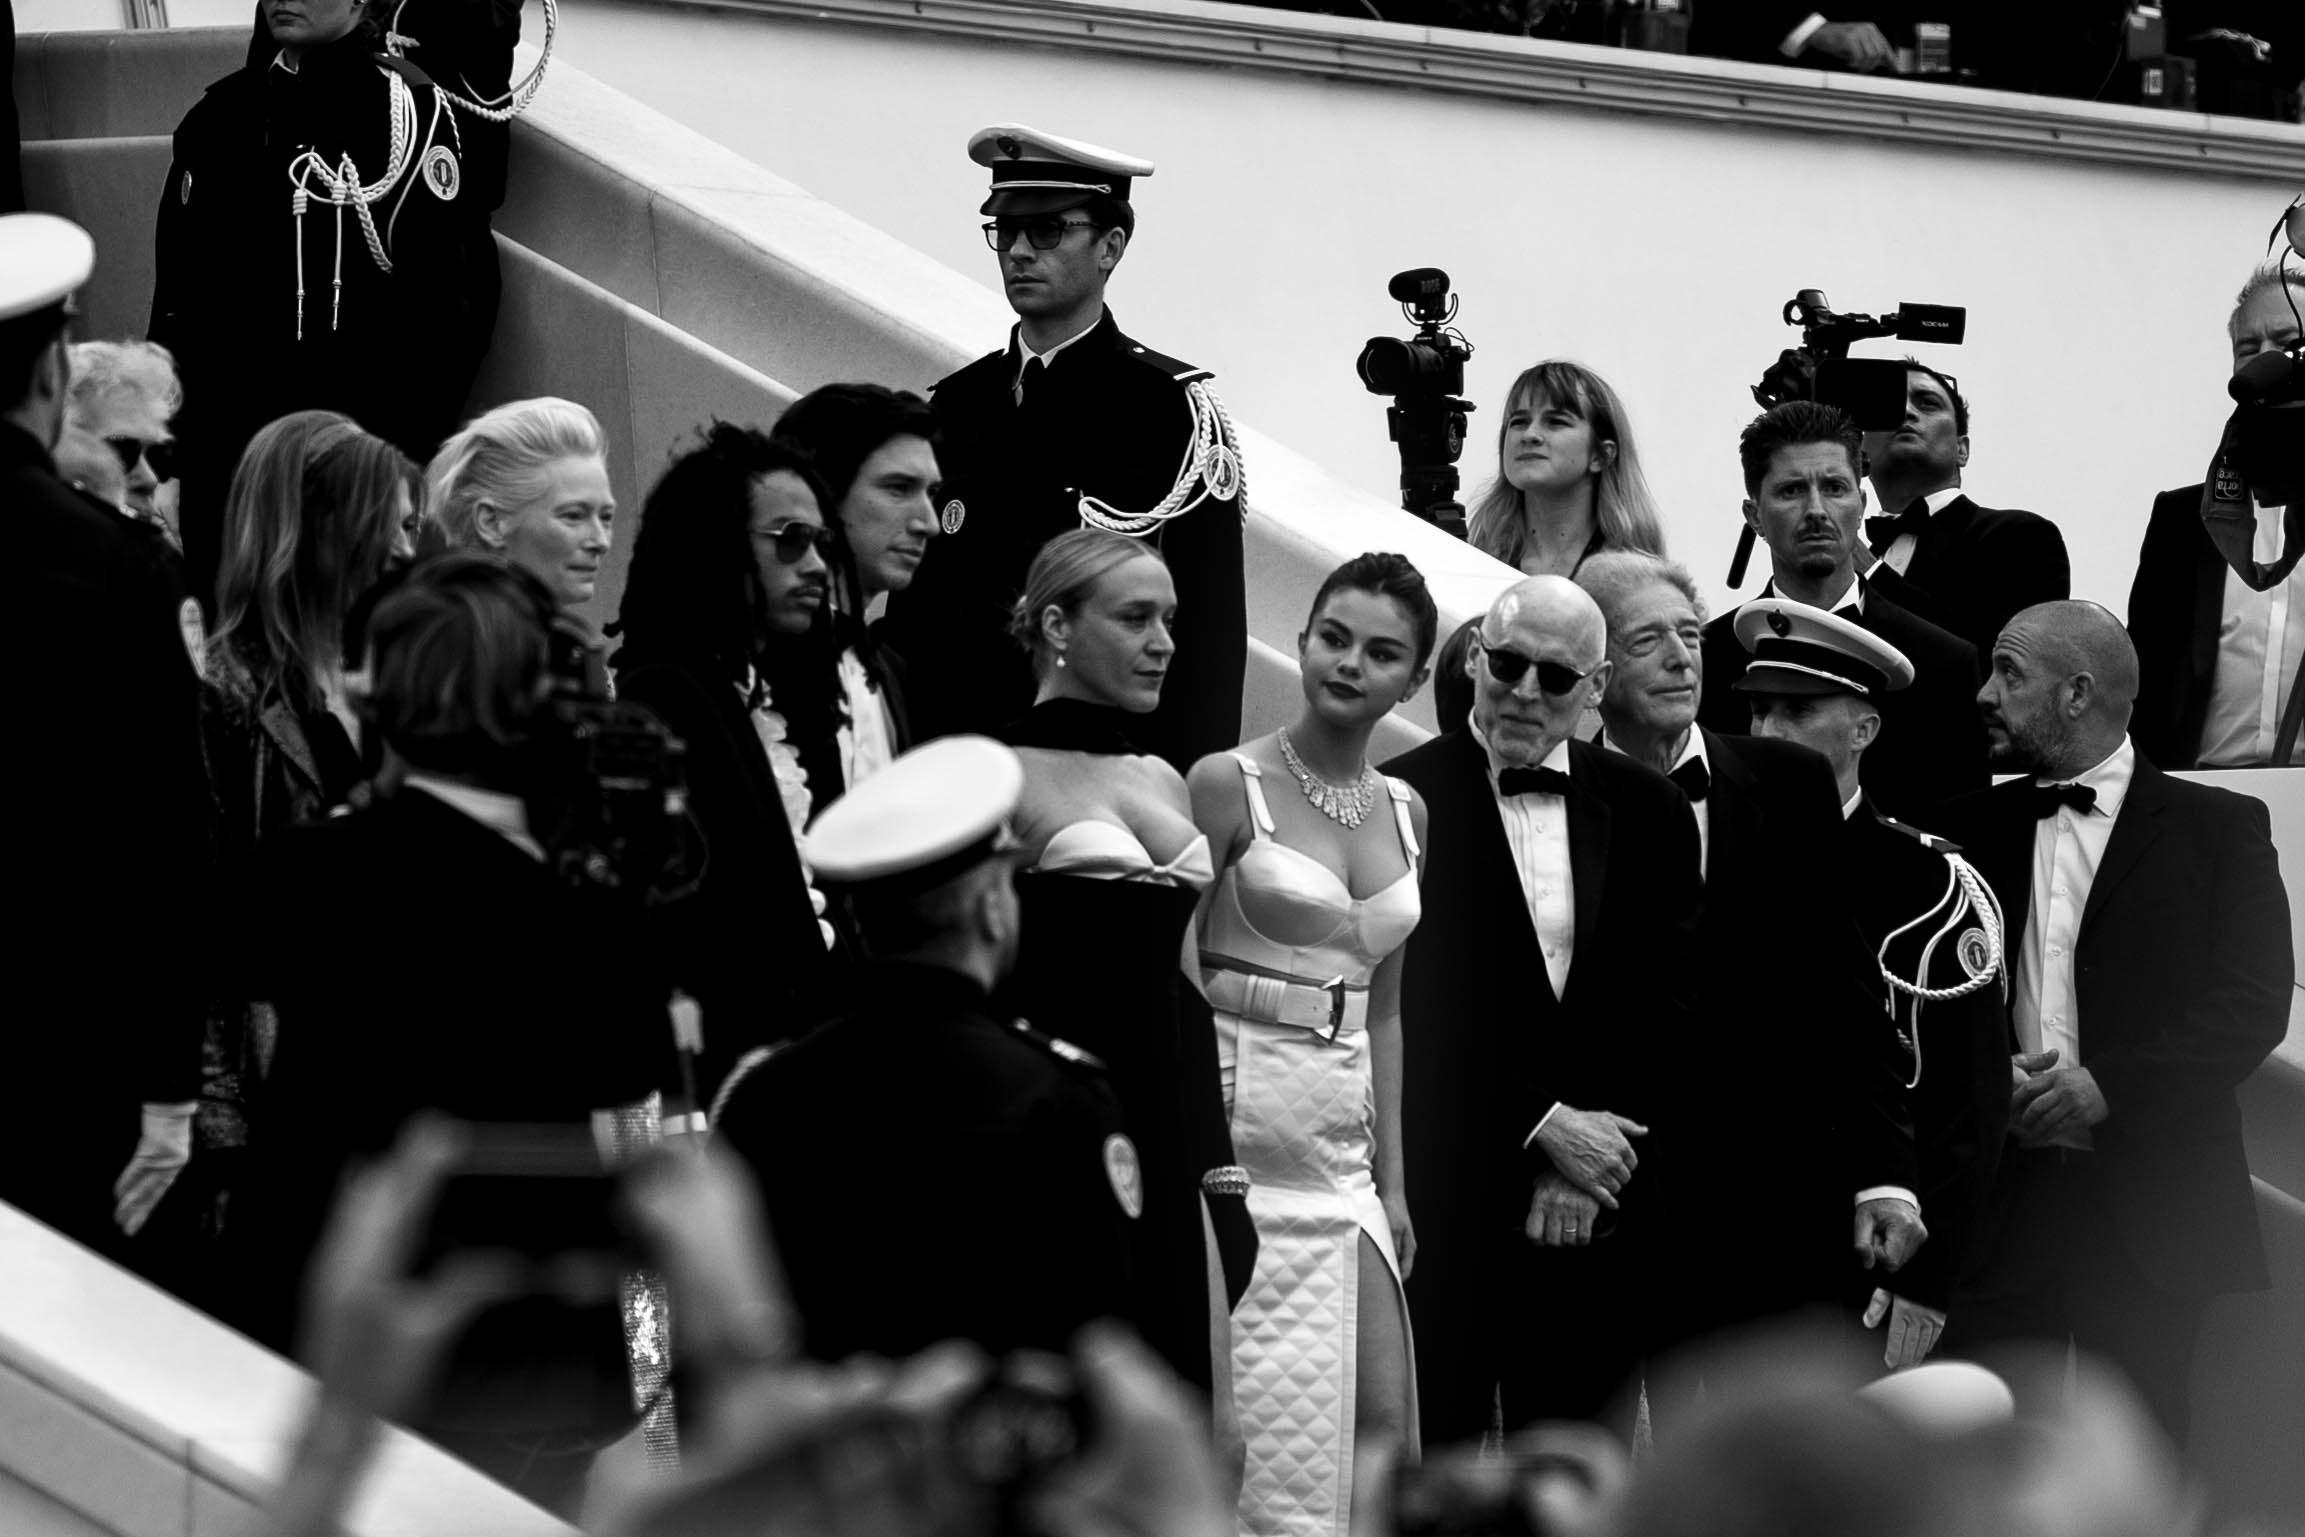 We saw The Dead Don’t Die premiere at Cannes